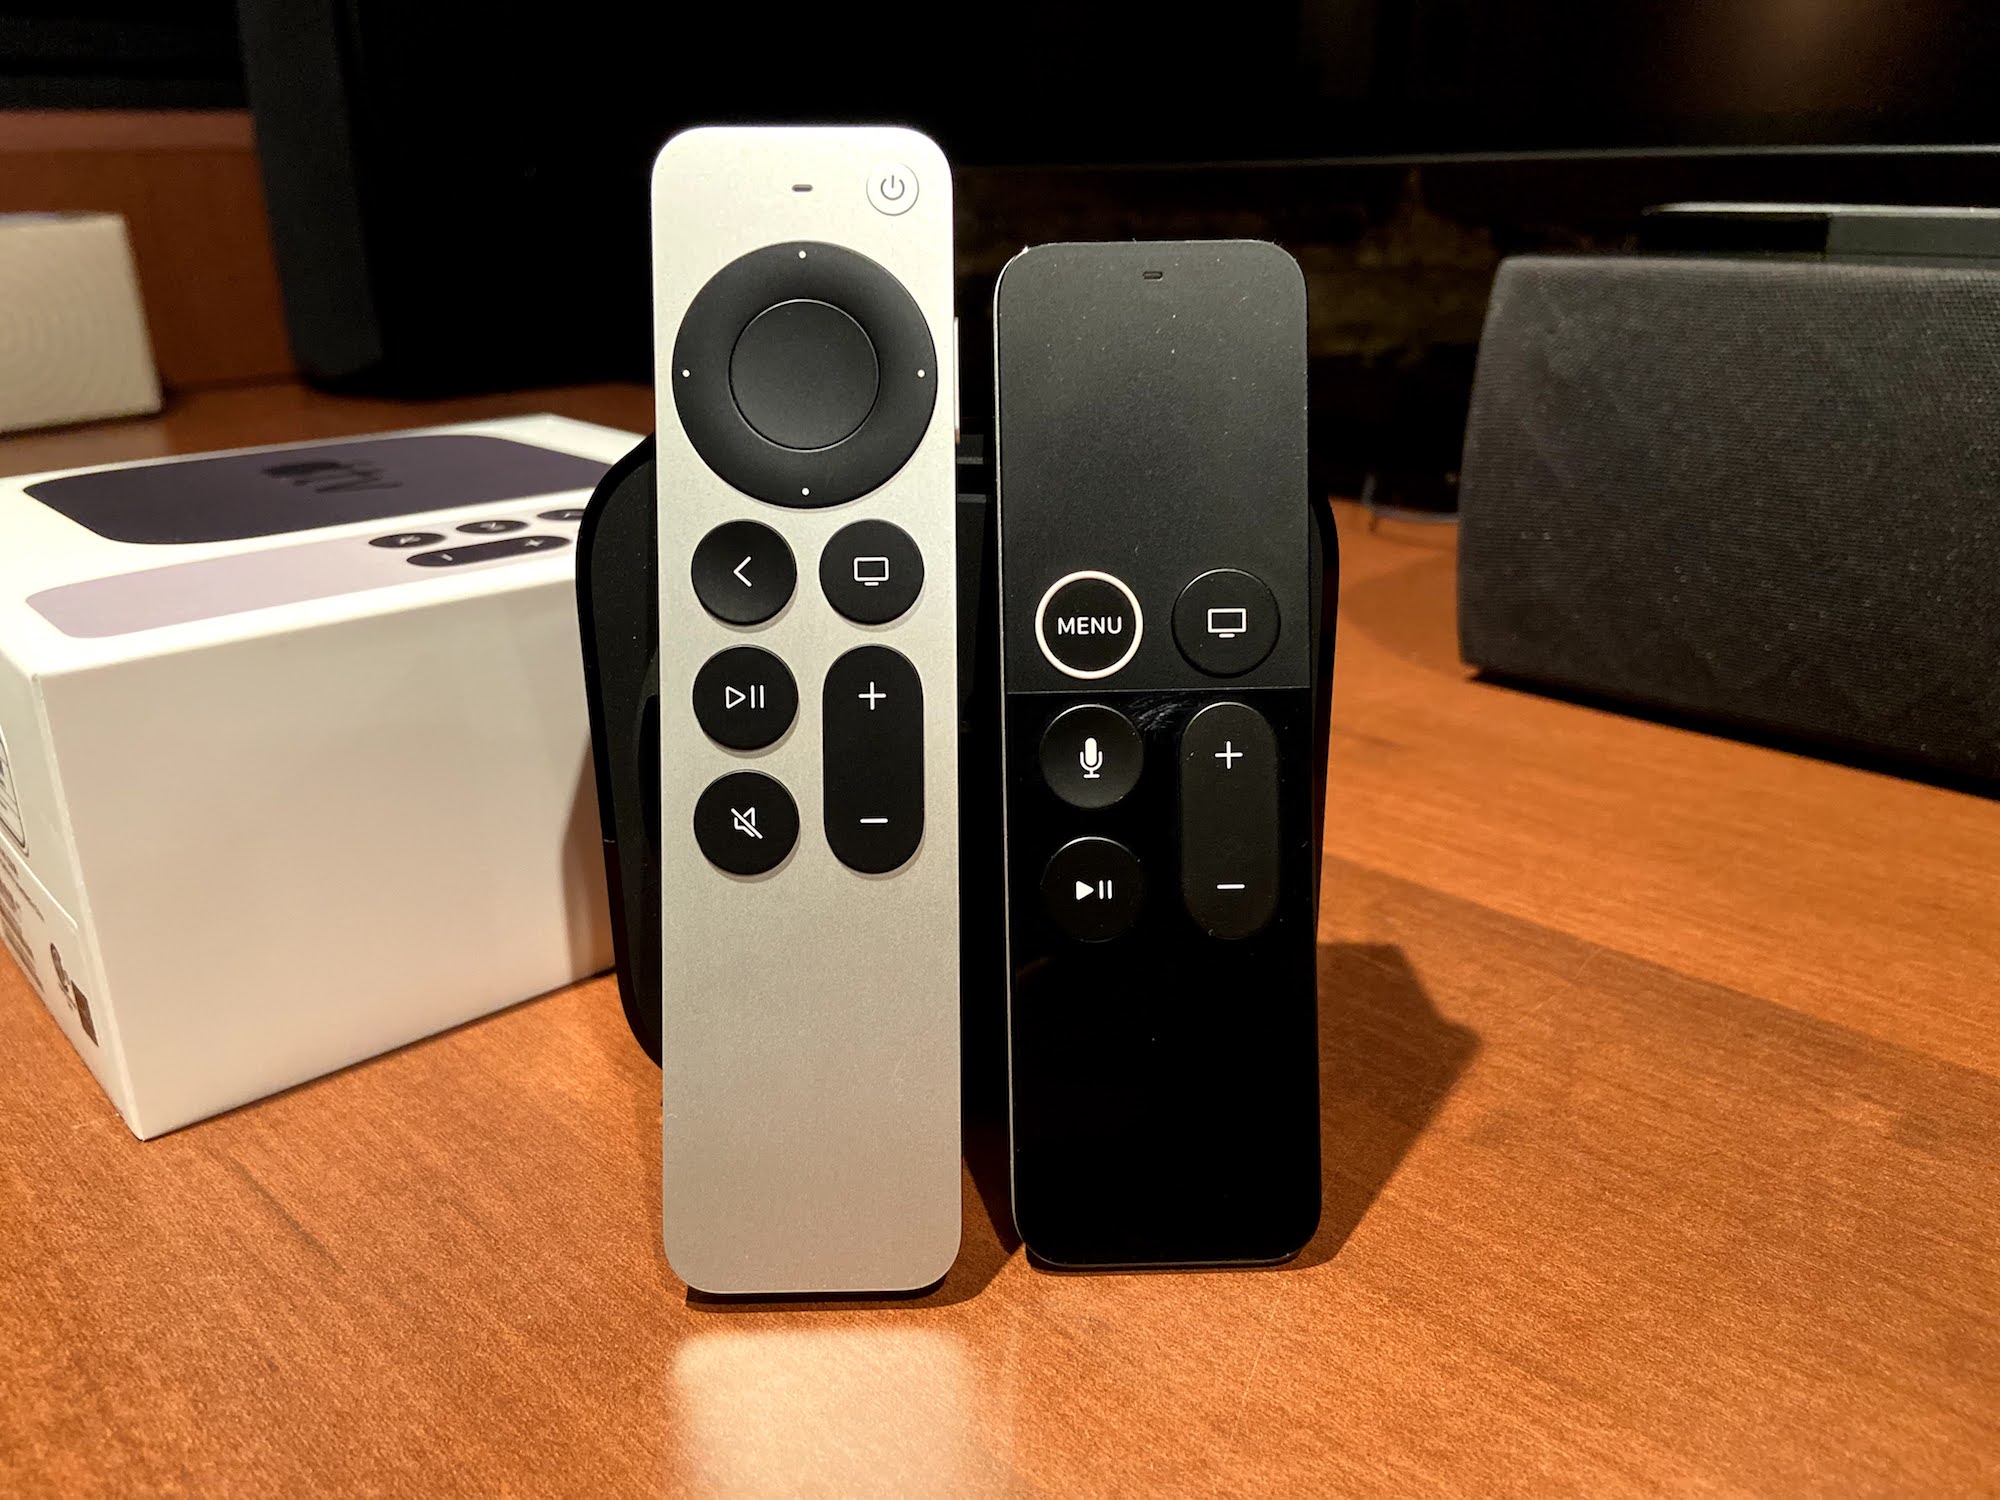  How to pair an Apple TV remote with an Apple TV